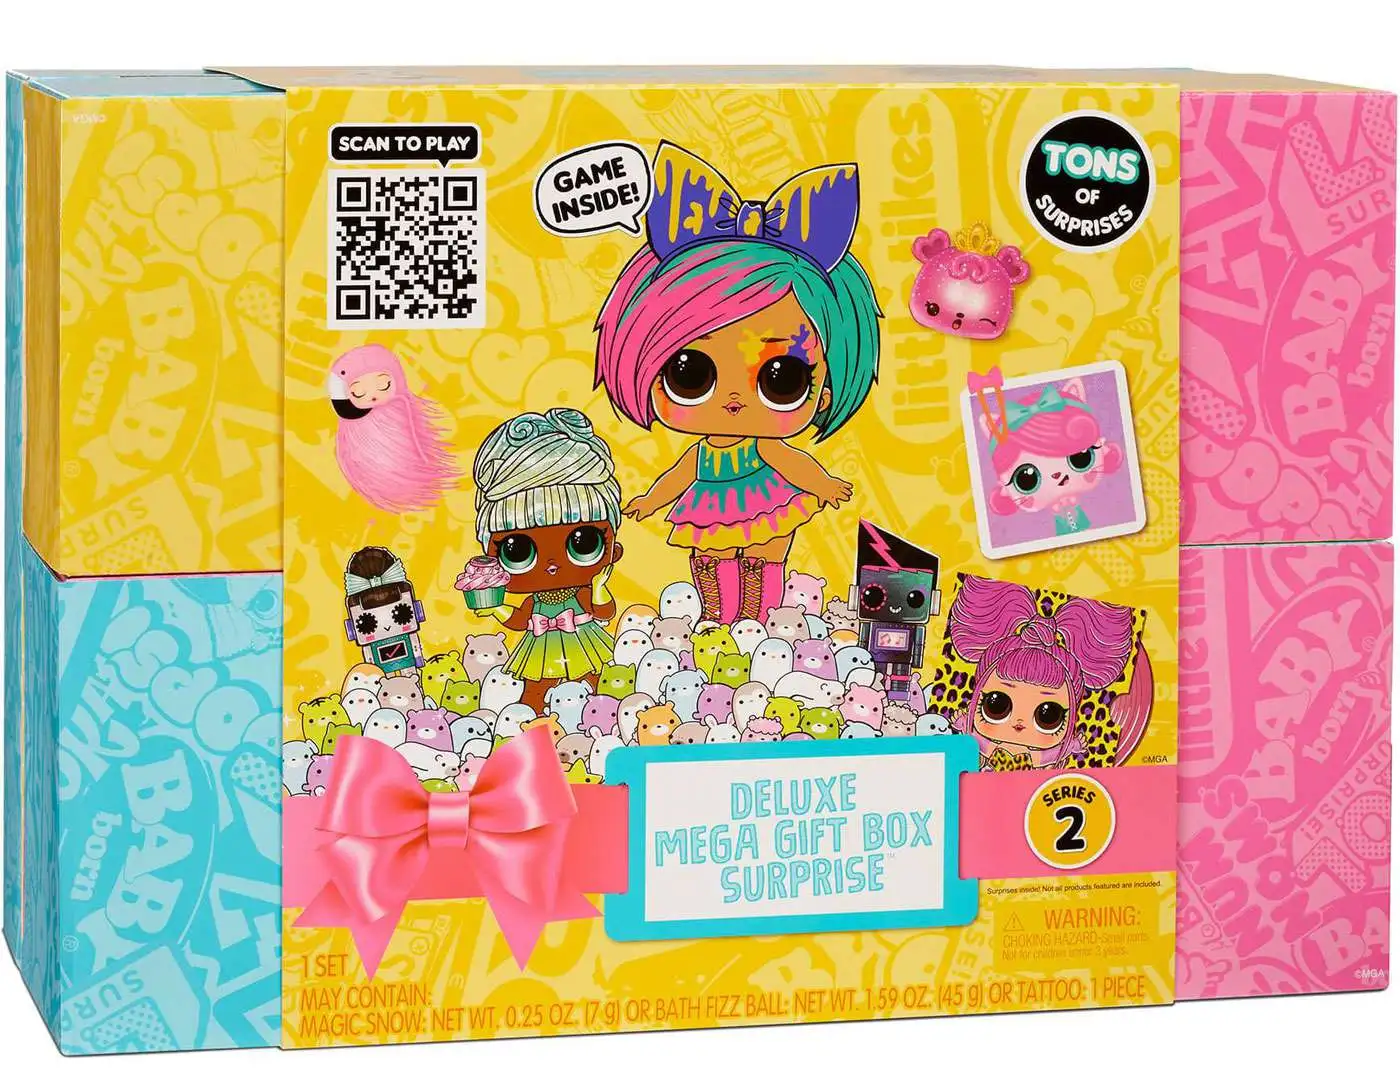 Who's That Girl Mini Makeup Mystery Pack with Keychain 